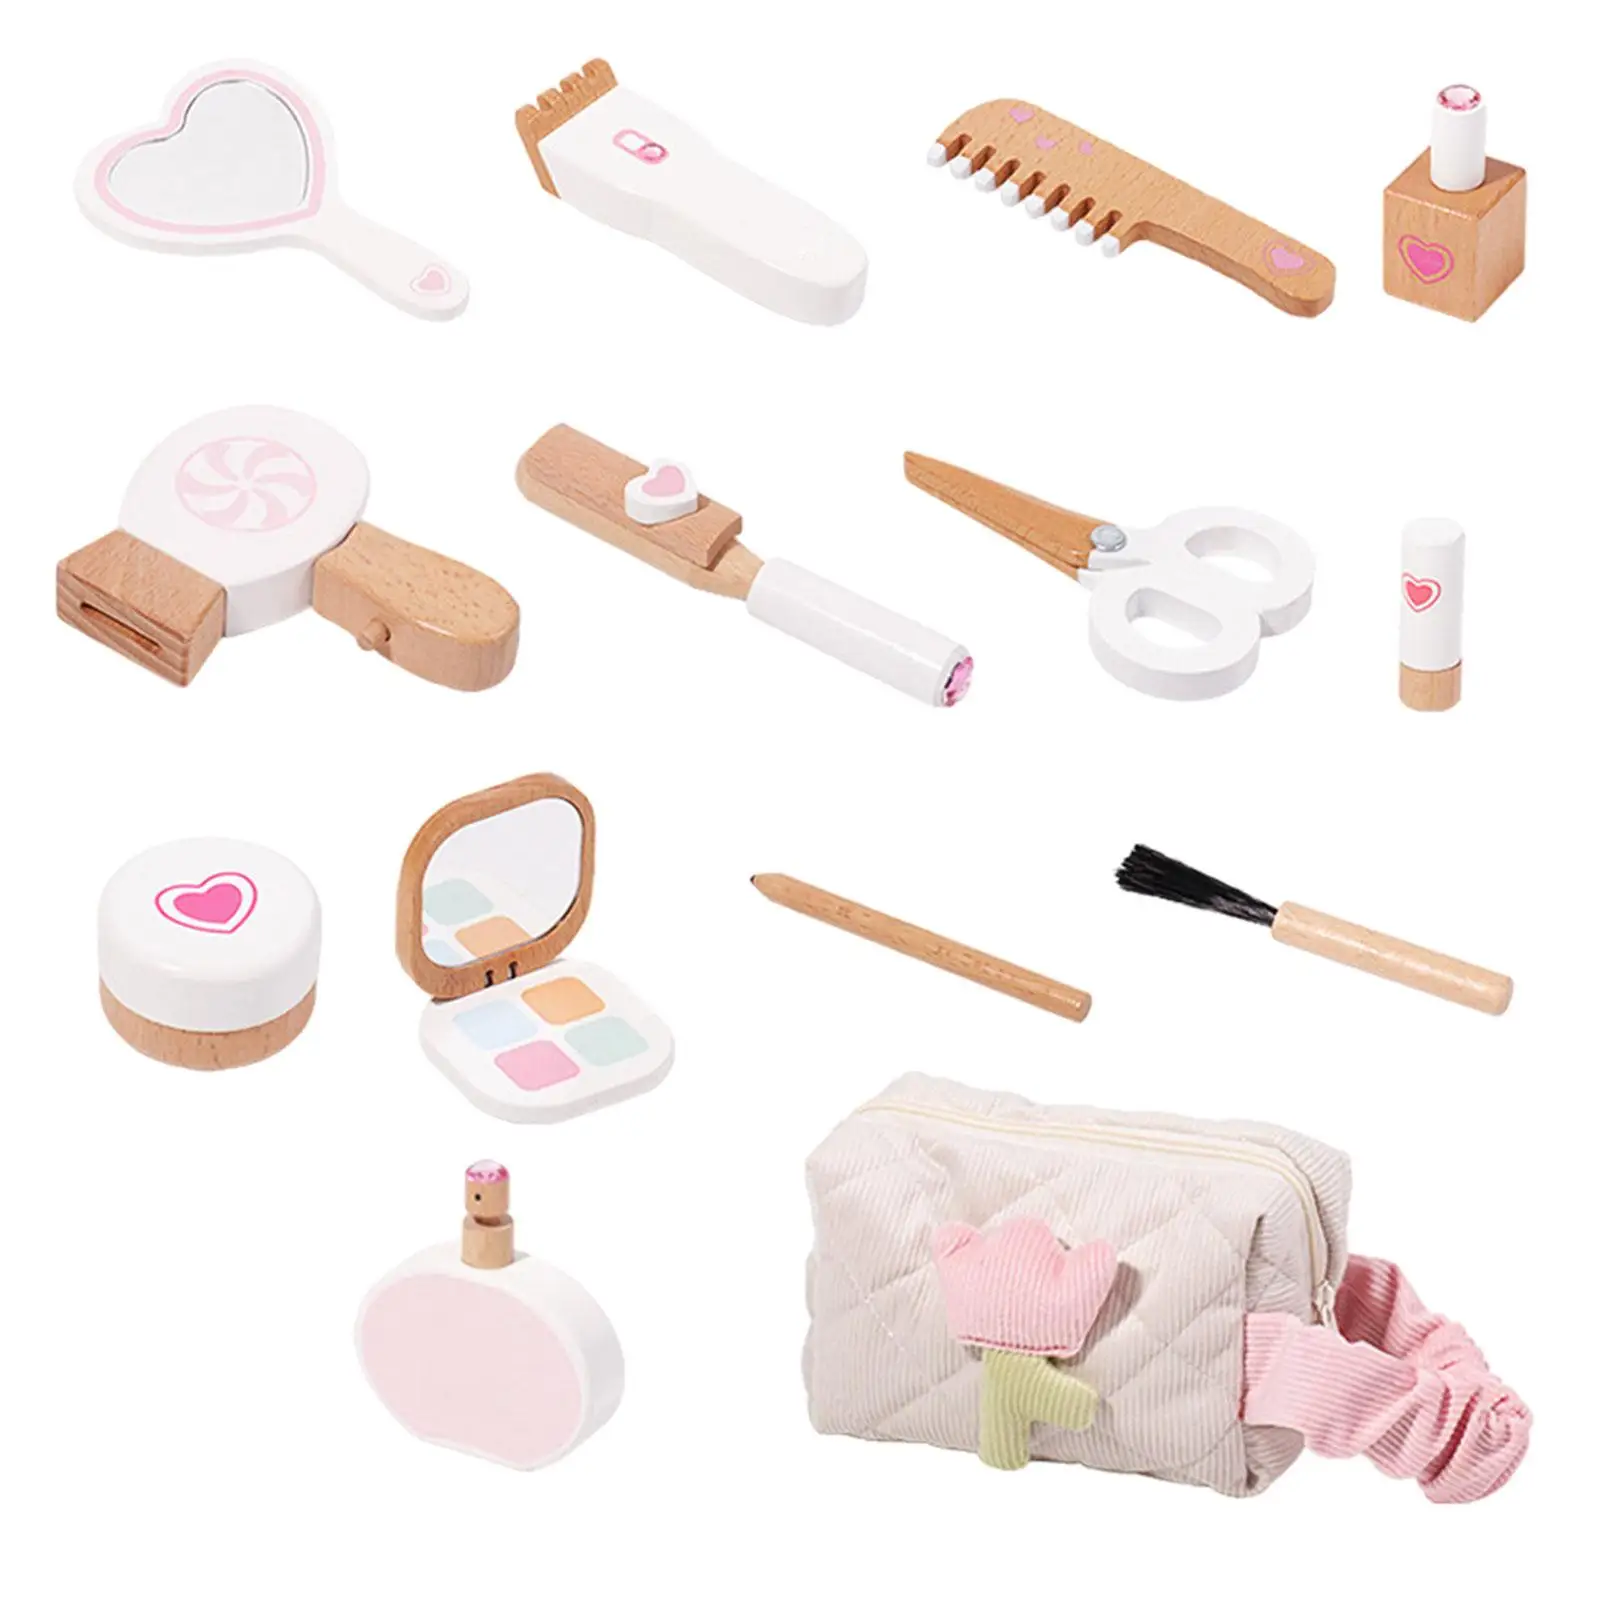 14x Makeup Kits for Girls Children Toy Portable Kids Cosmetic Set Toys for Party Favors Holiday Princess Gifts New Year Birthday